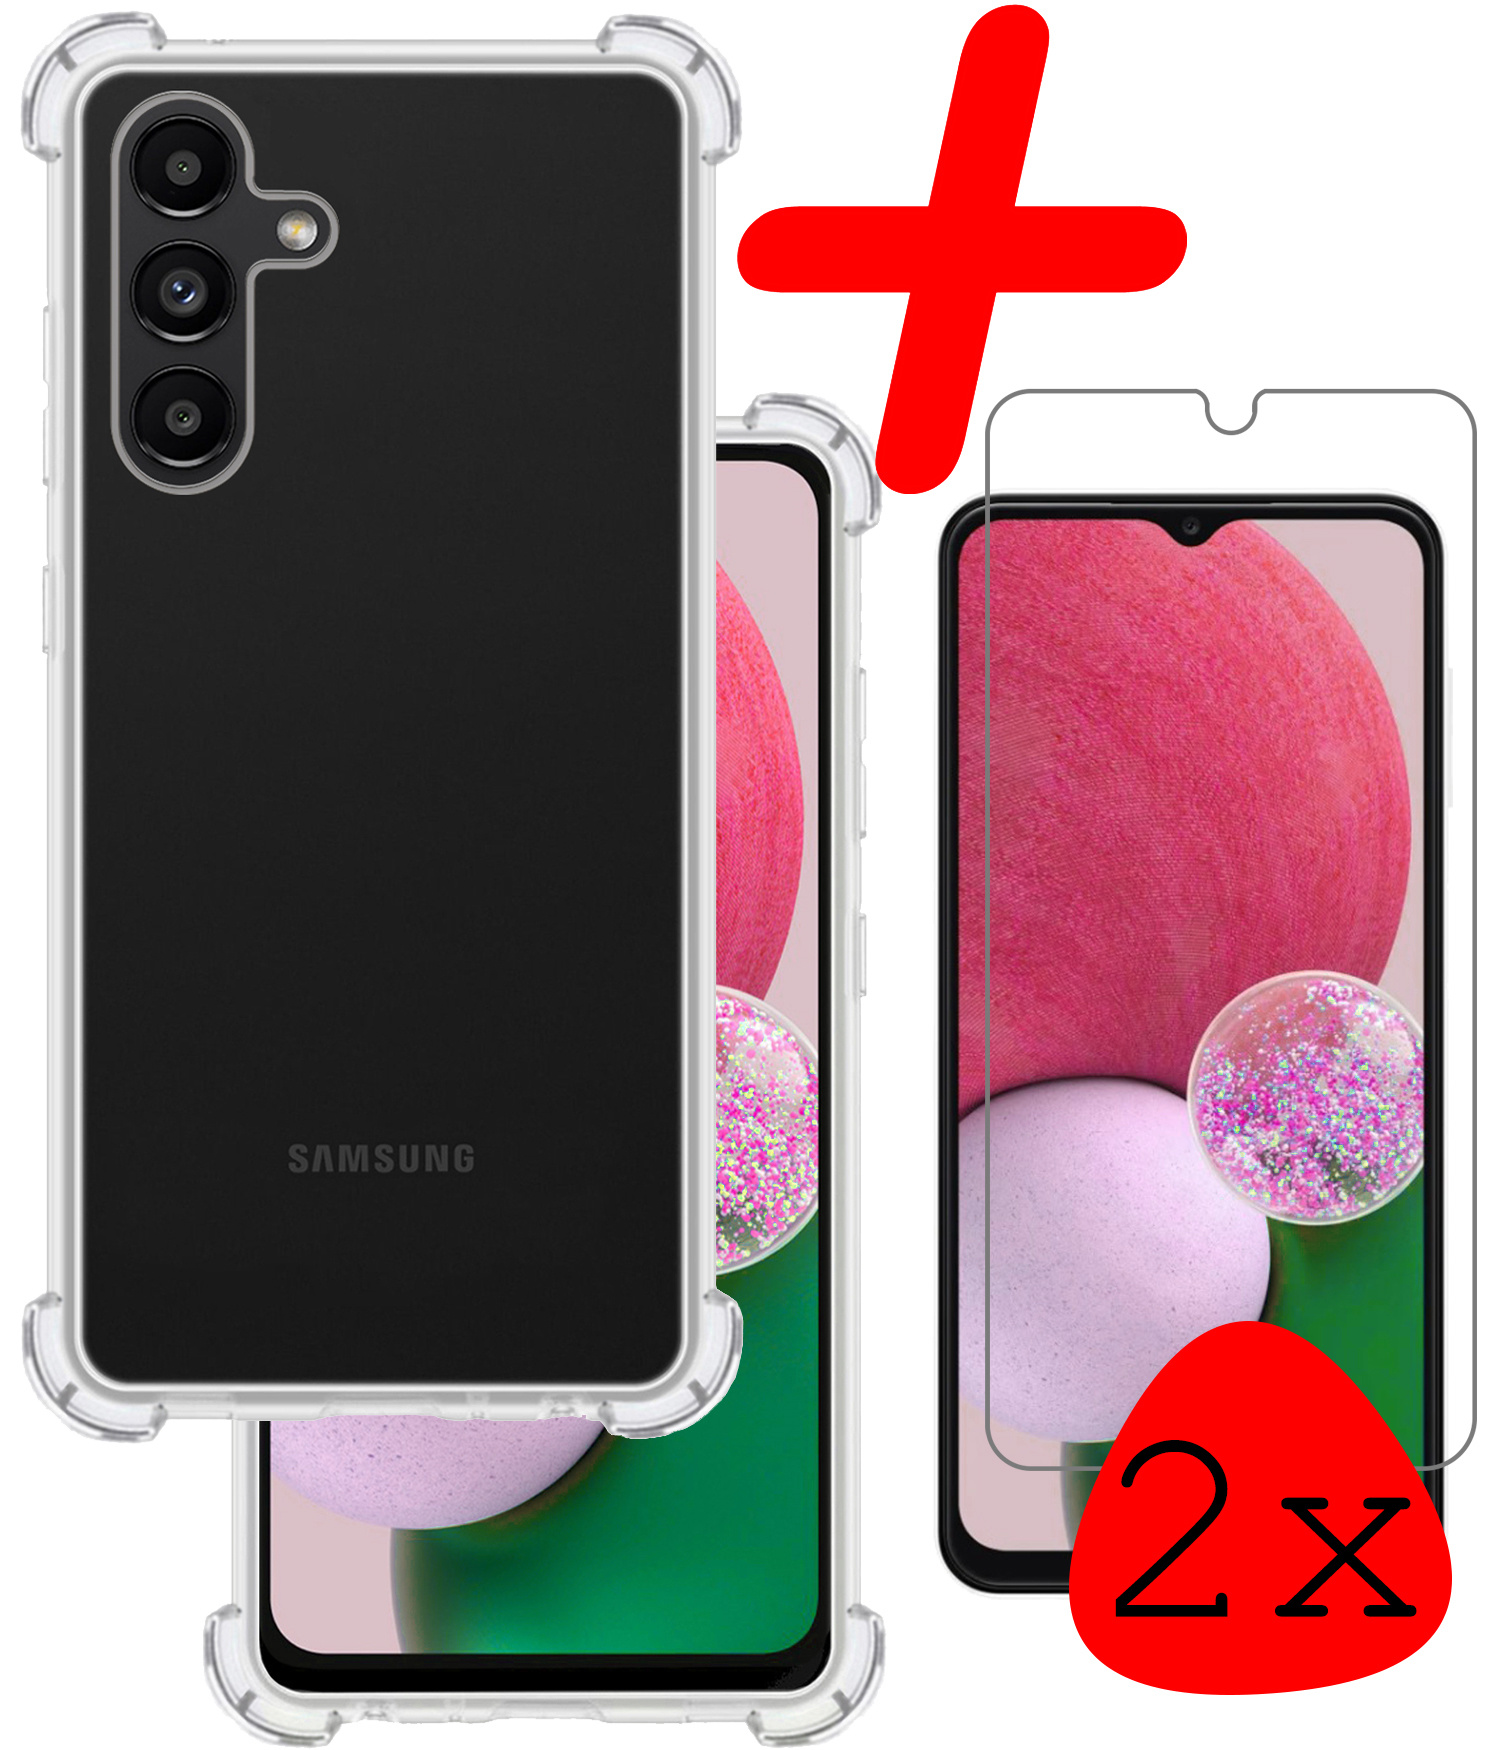 BASEY. Samsung Galaxy A13 5G Hoesje Shock Proof Met 2x Screenprotector Tempered Glass - Samsung Galaxy A13 5G Screen Protector Beschermglas Hoes Shockproof - Transparant